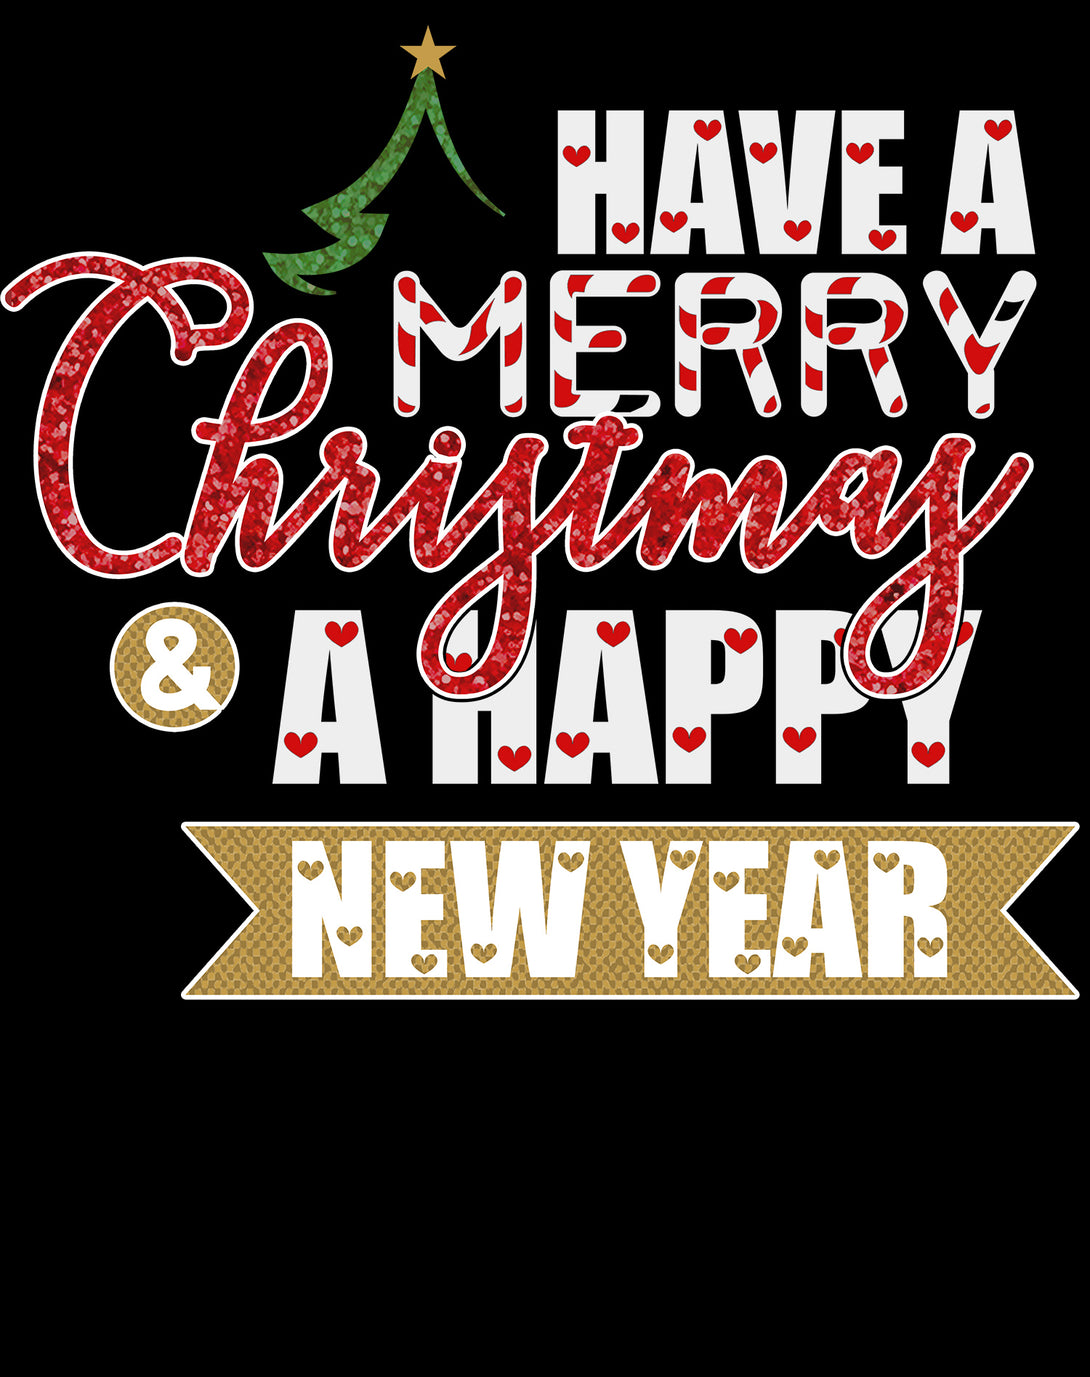 NYE Merry Christmas Happy New Year Hearts Party Xmas Eve Women's T-Shirt Black - Urban Species Design Close Up